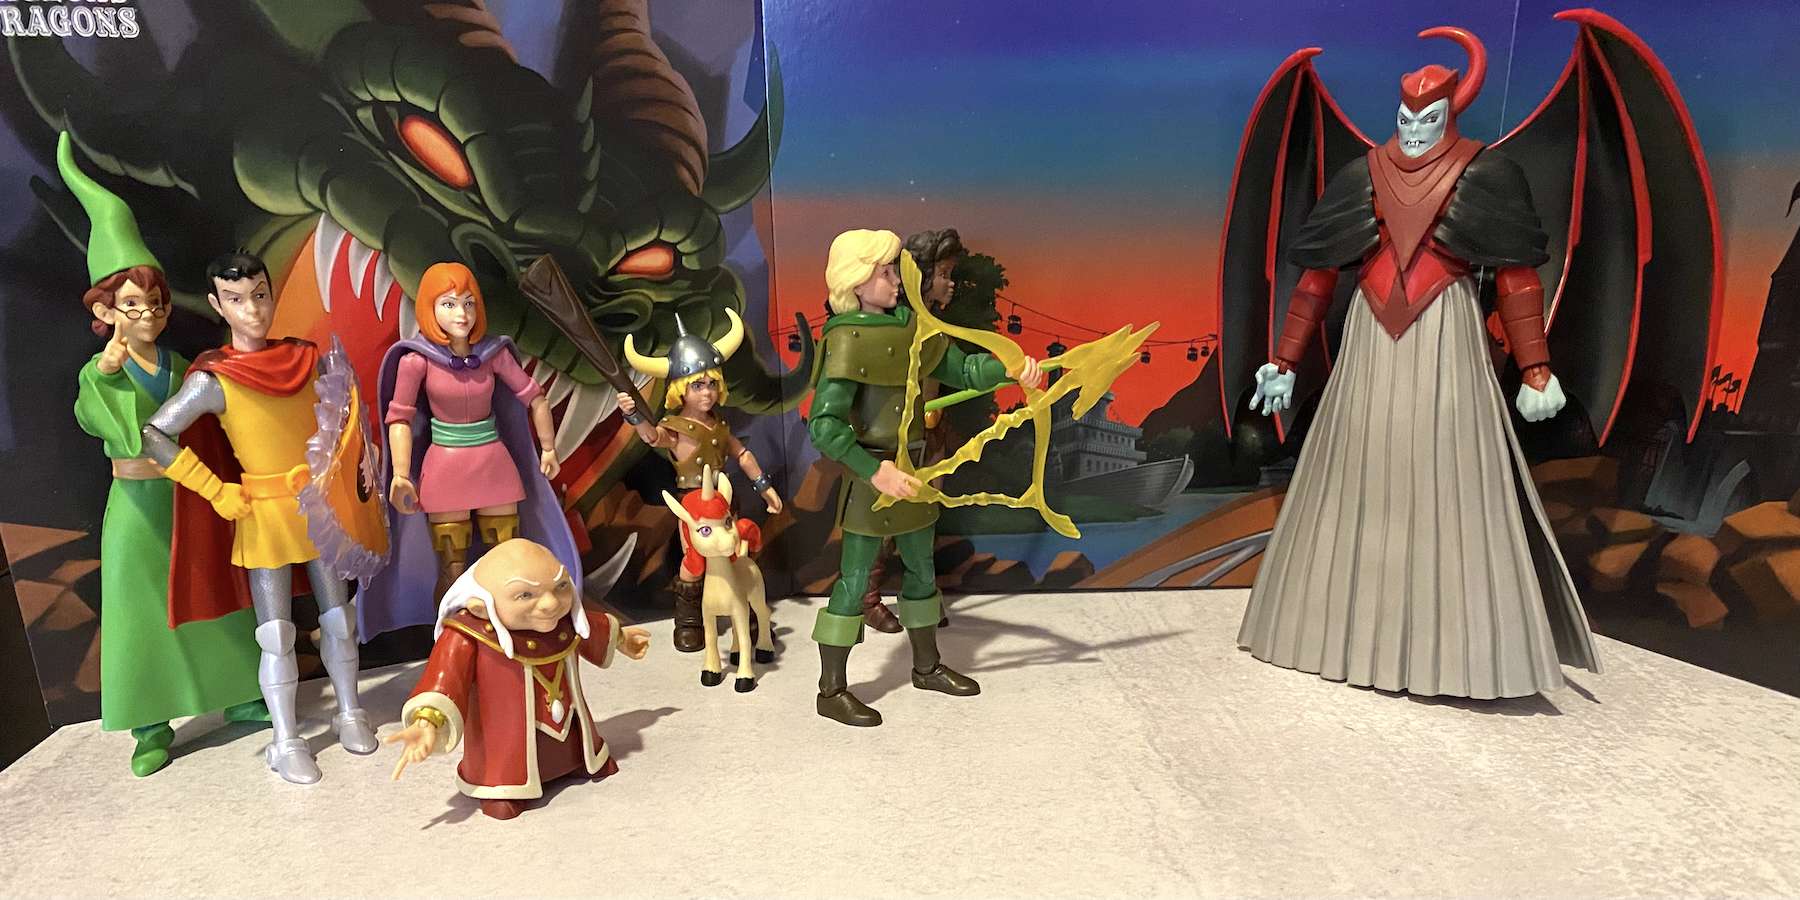 Dungeons and Dragons action figures